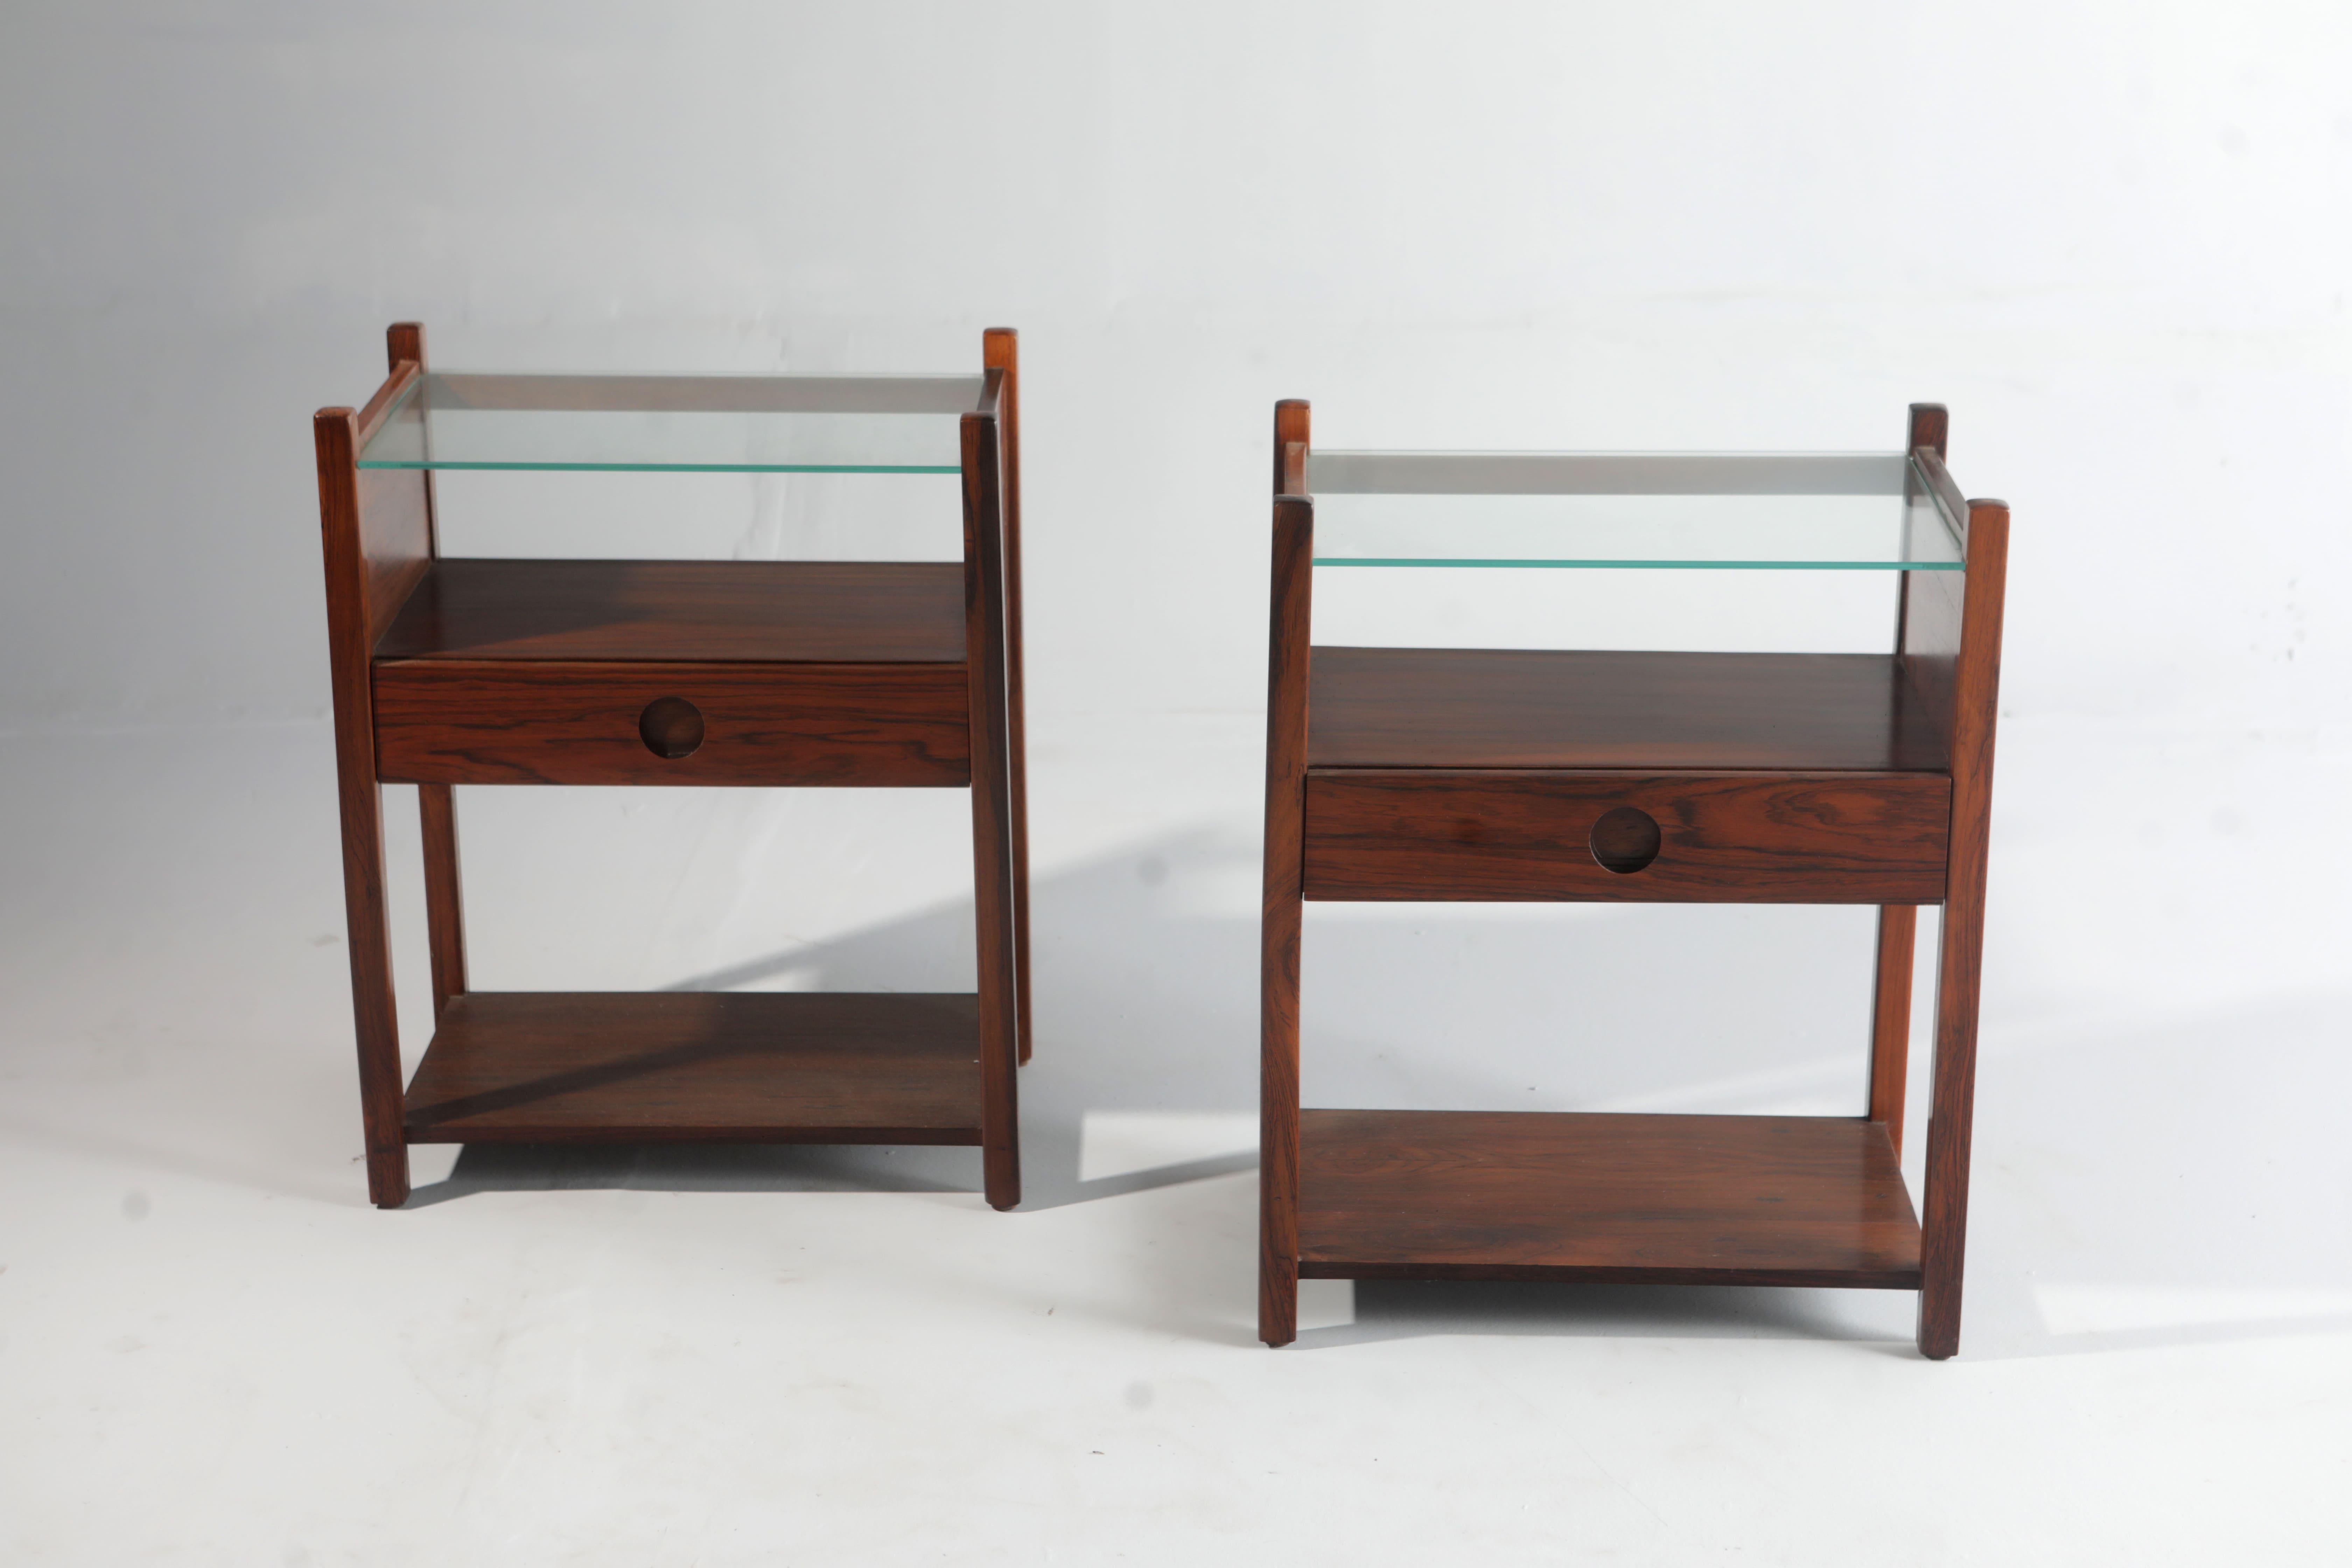 Brazilian Set of Two Mid-Century Modern “Yara“ Bedside Tables by Sergio Rodrigues, Brazil